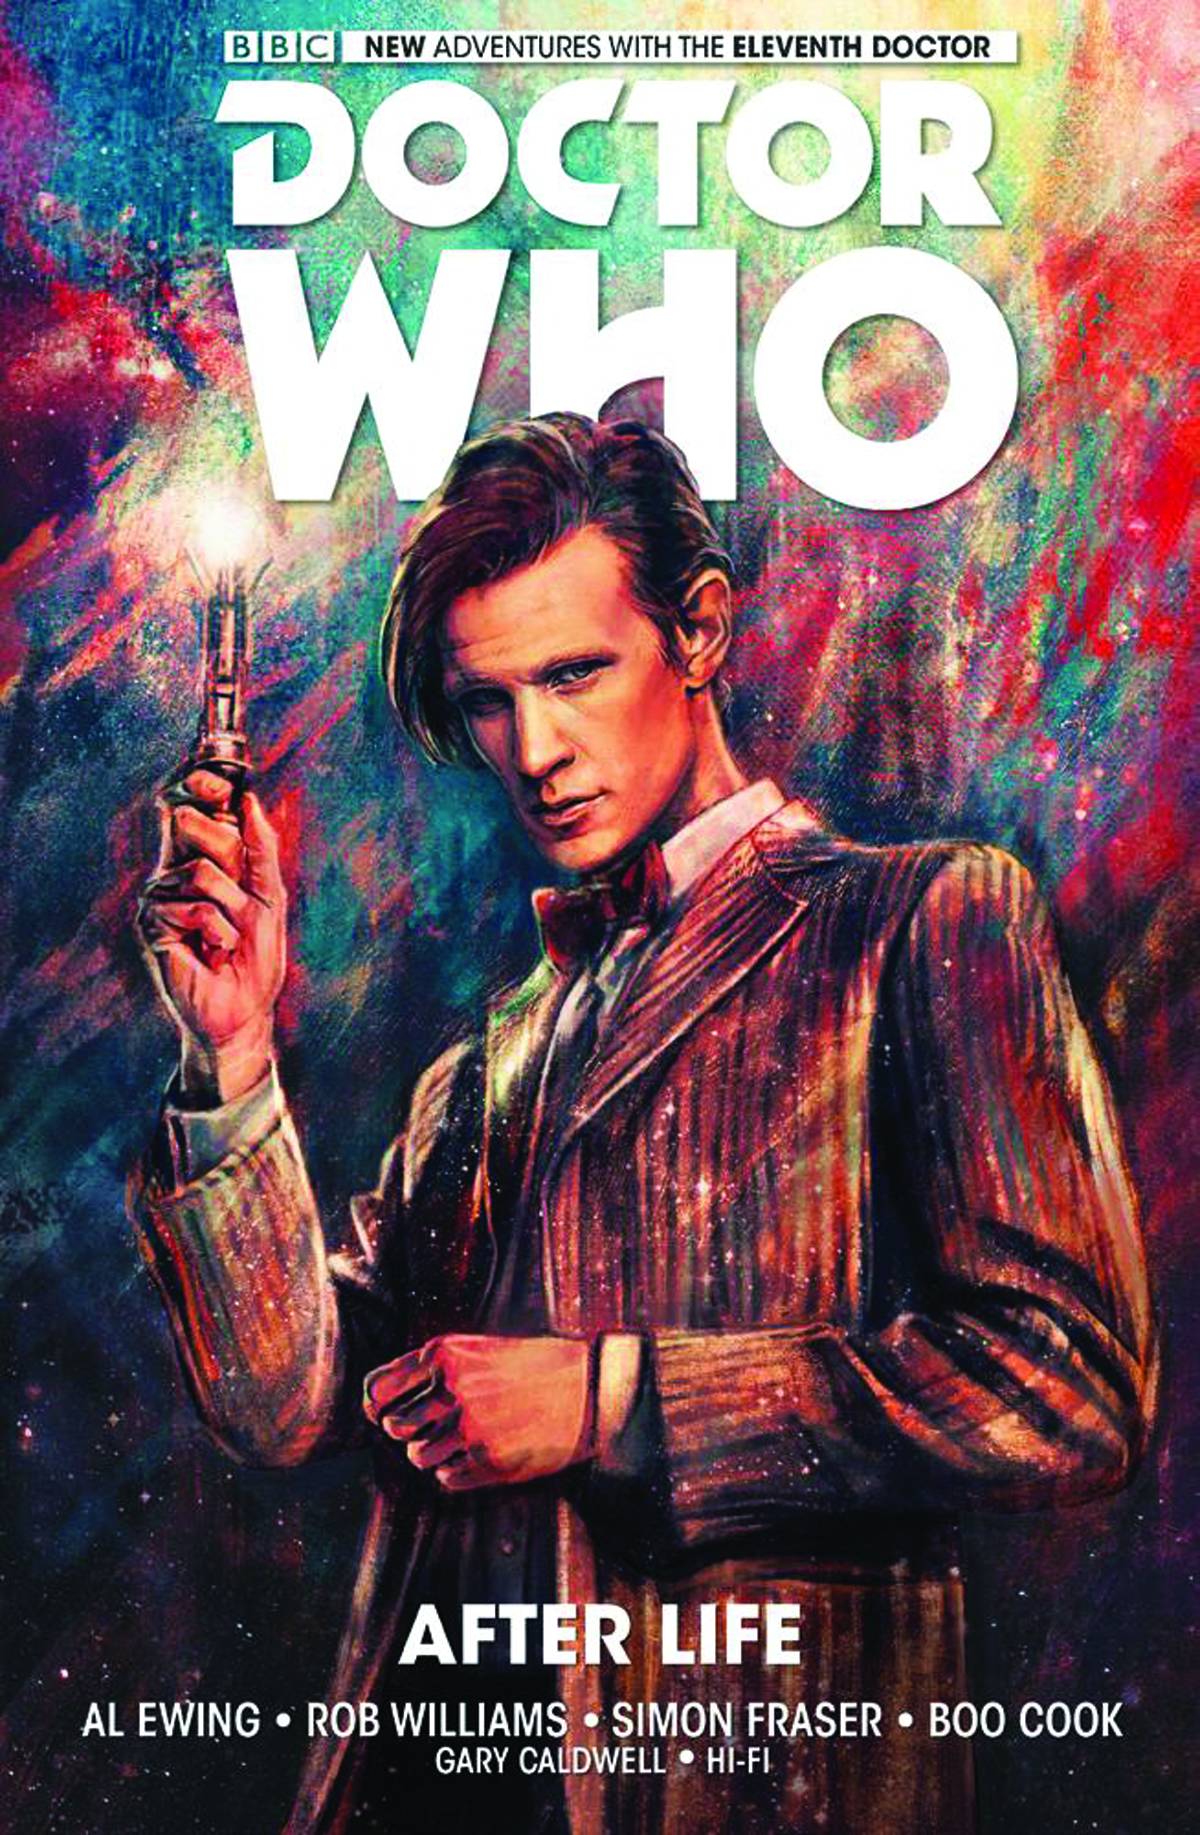 Doctor Who 11th Doctor Hardcover Graphic Novel Volume 1 After Life